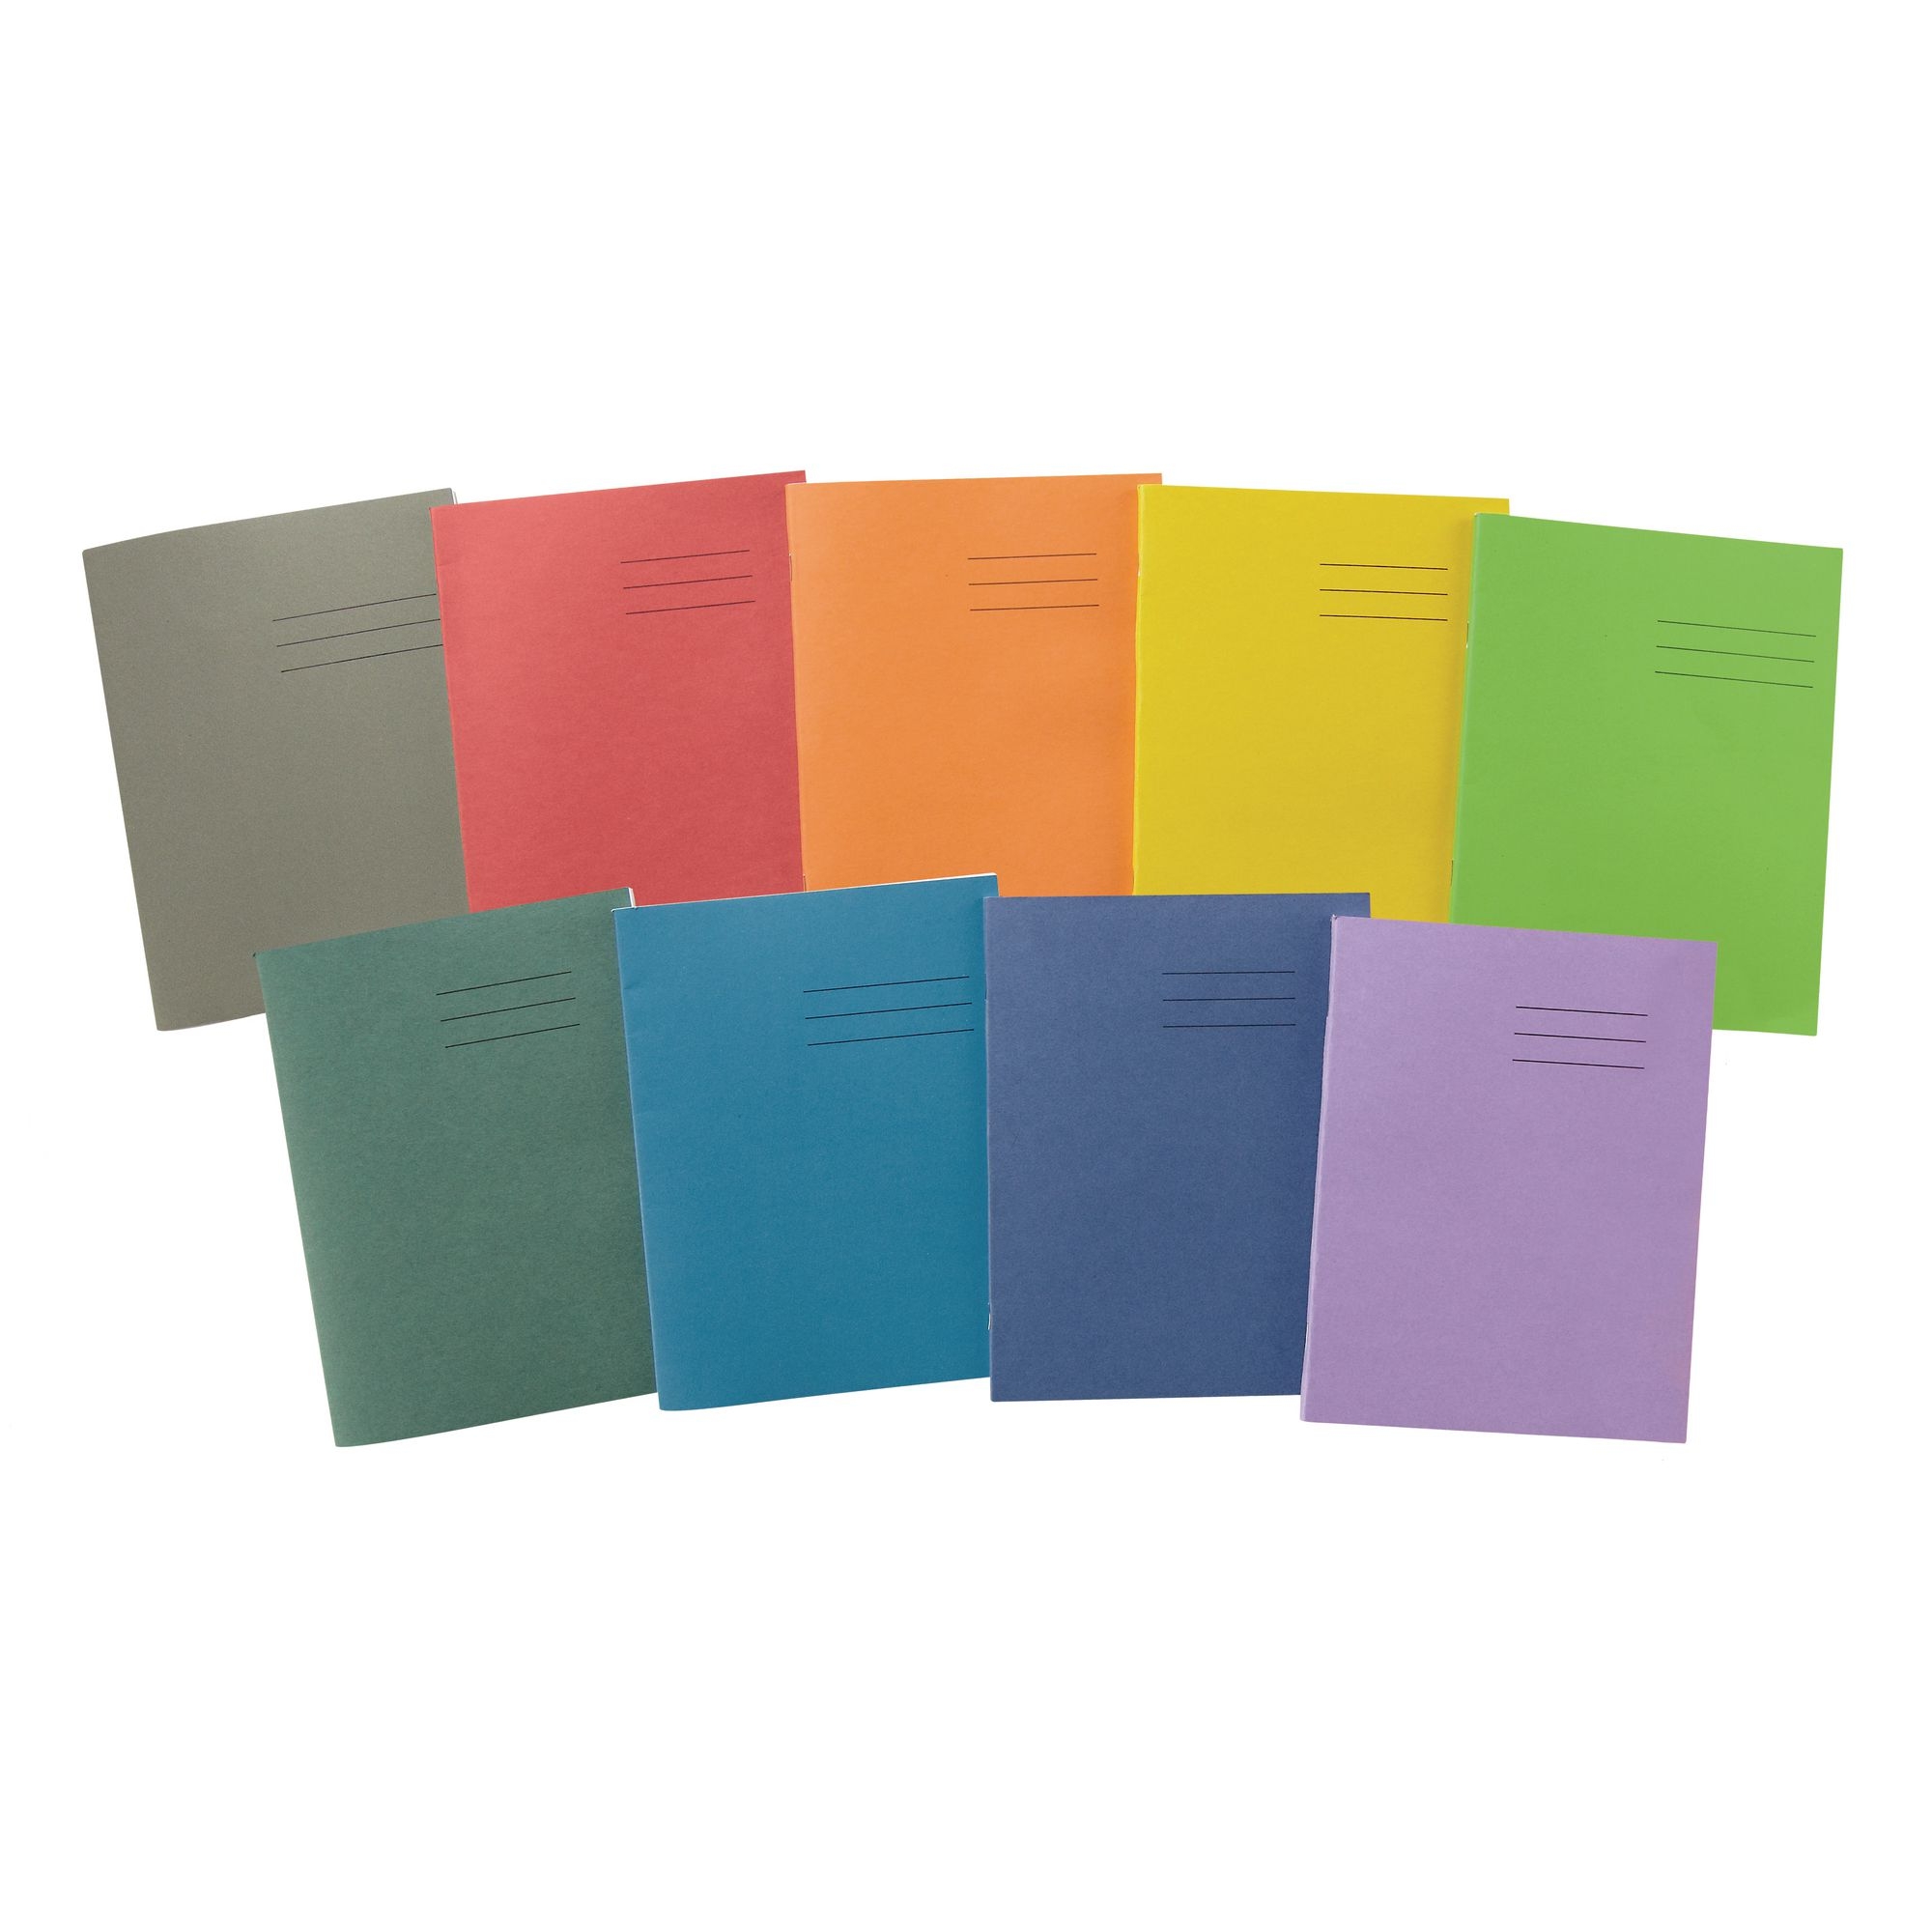 Dark Green 9x7" Exercise Book 48-Page, 8mm Ruled With Margin - Pack of 100